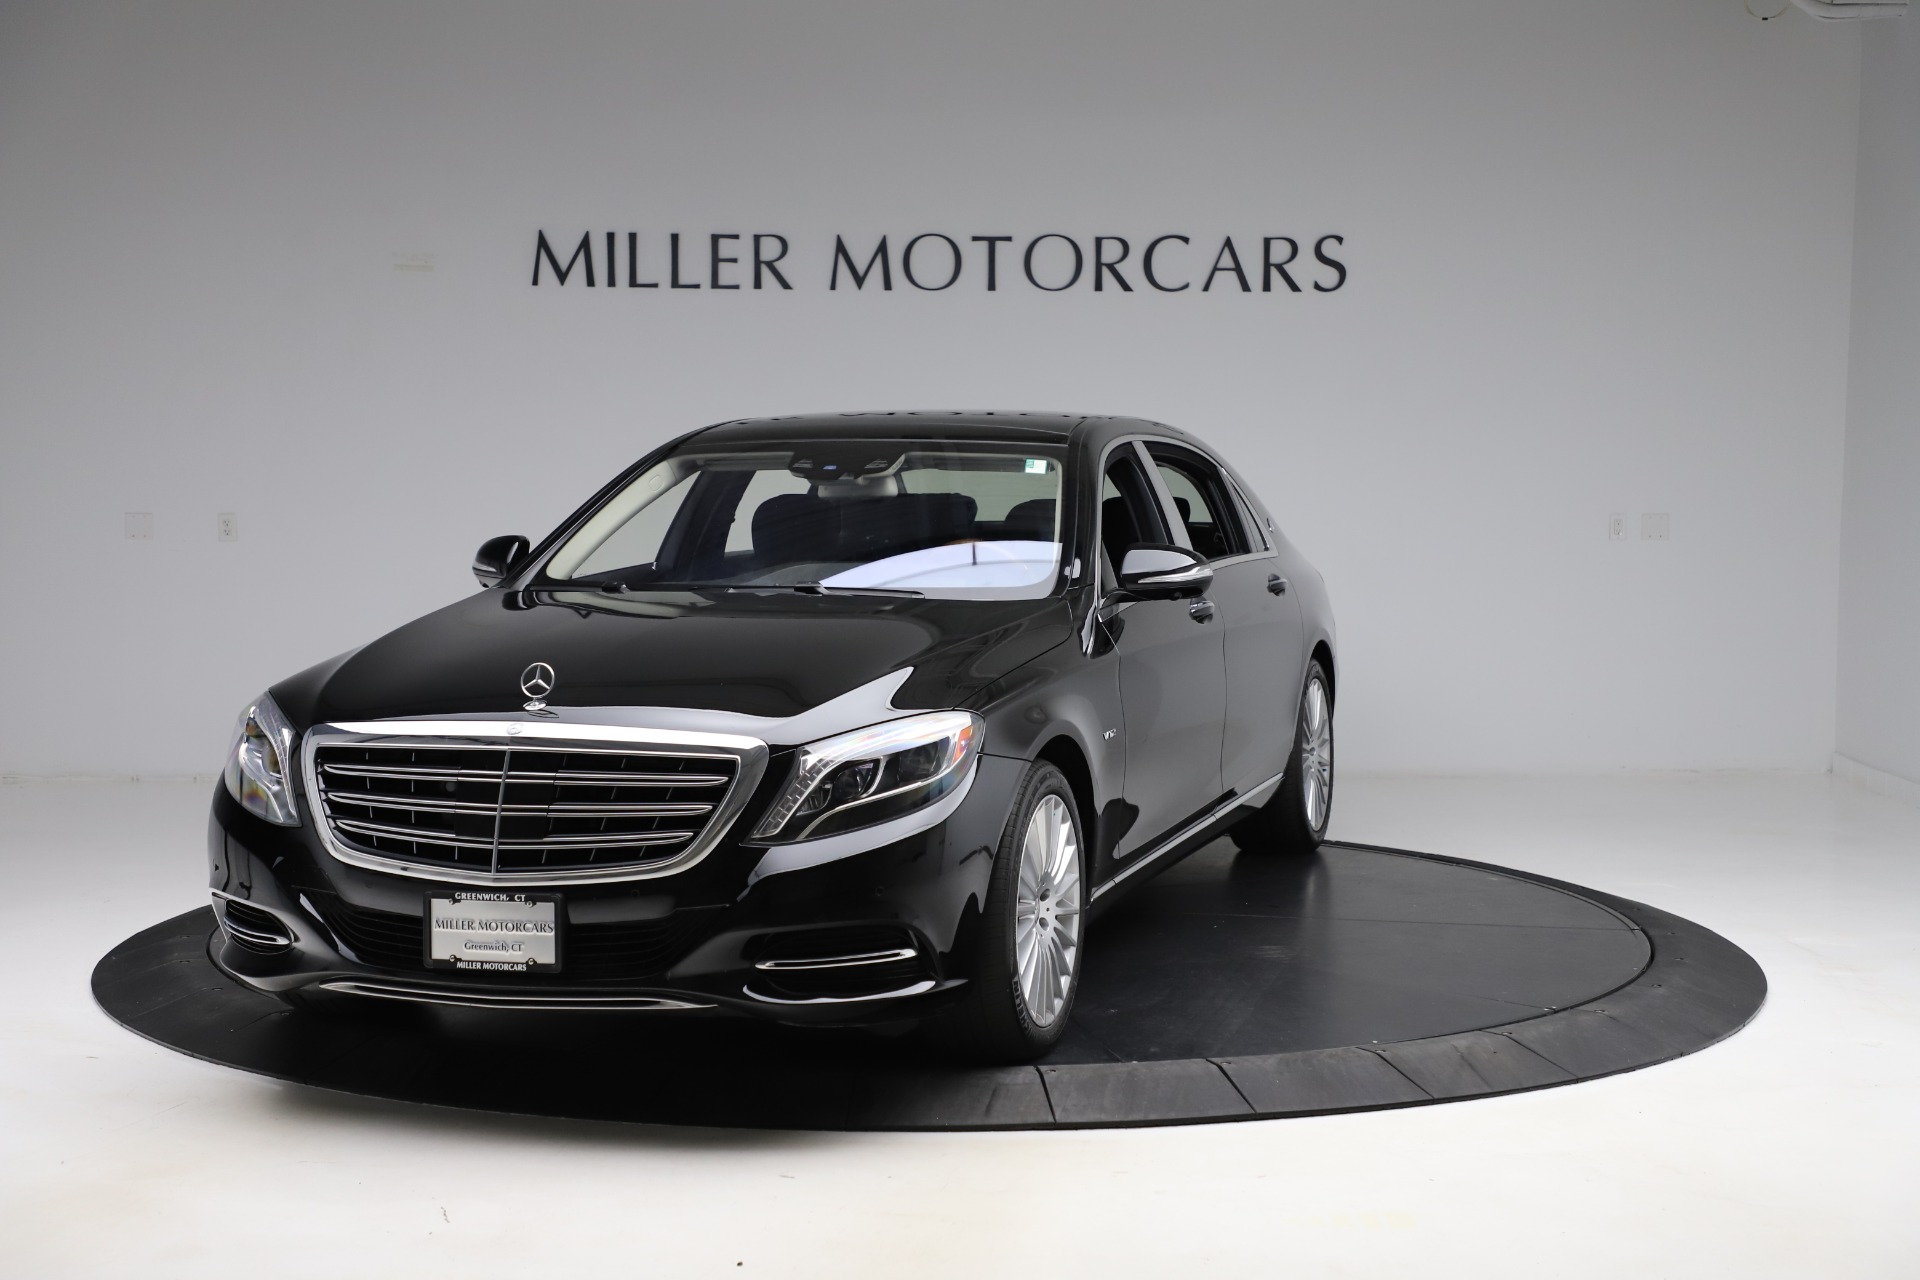 Pre Owned 2016 Mercedes Benz S Class Mercedes Maybach S 600 For Sale Miller Motorcars Stock B1485a